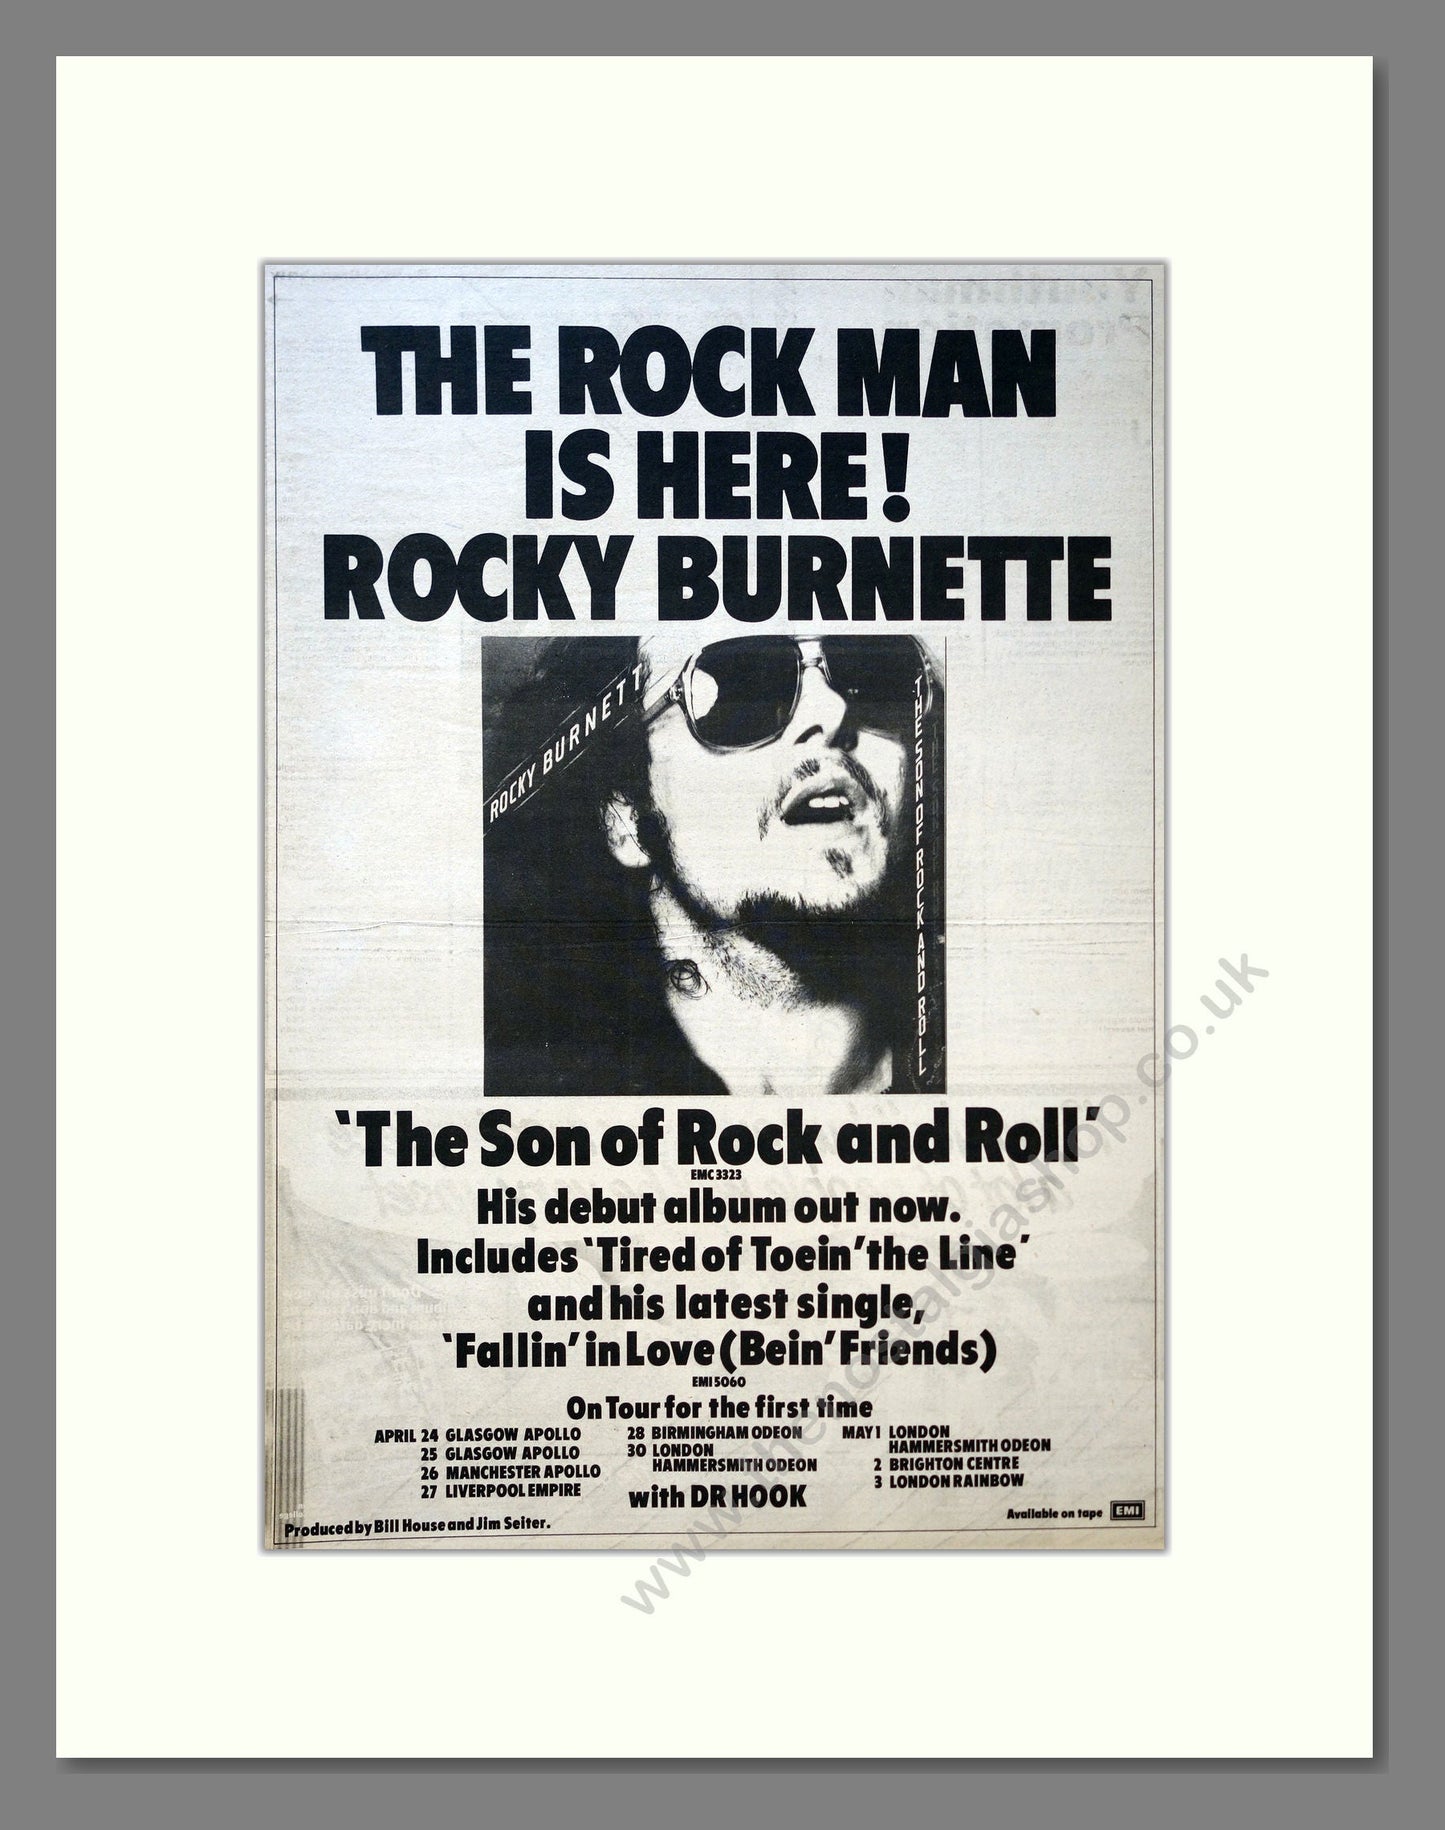 Rocky Burnette - The Son Of Rock And Roll. Vintage Advert 1980 (ref AD18186)